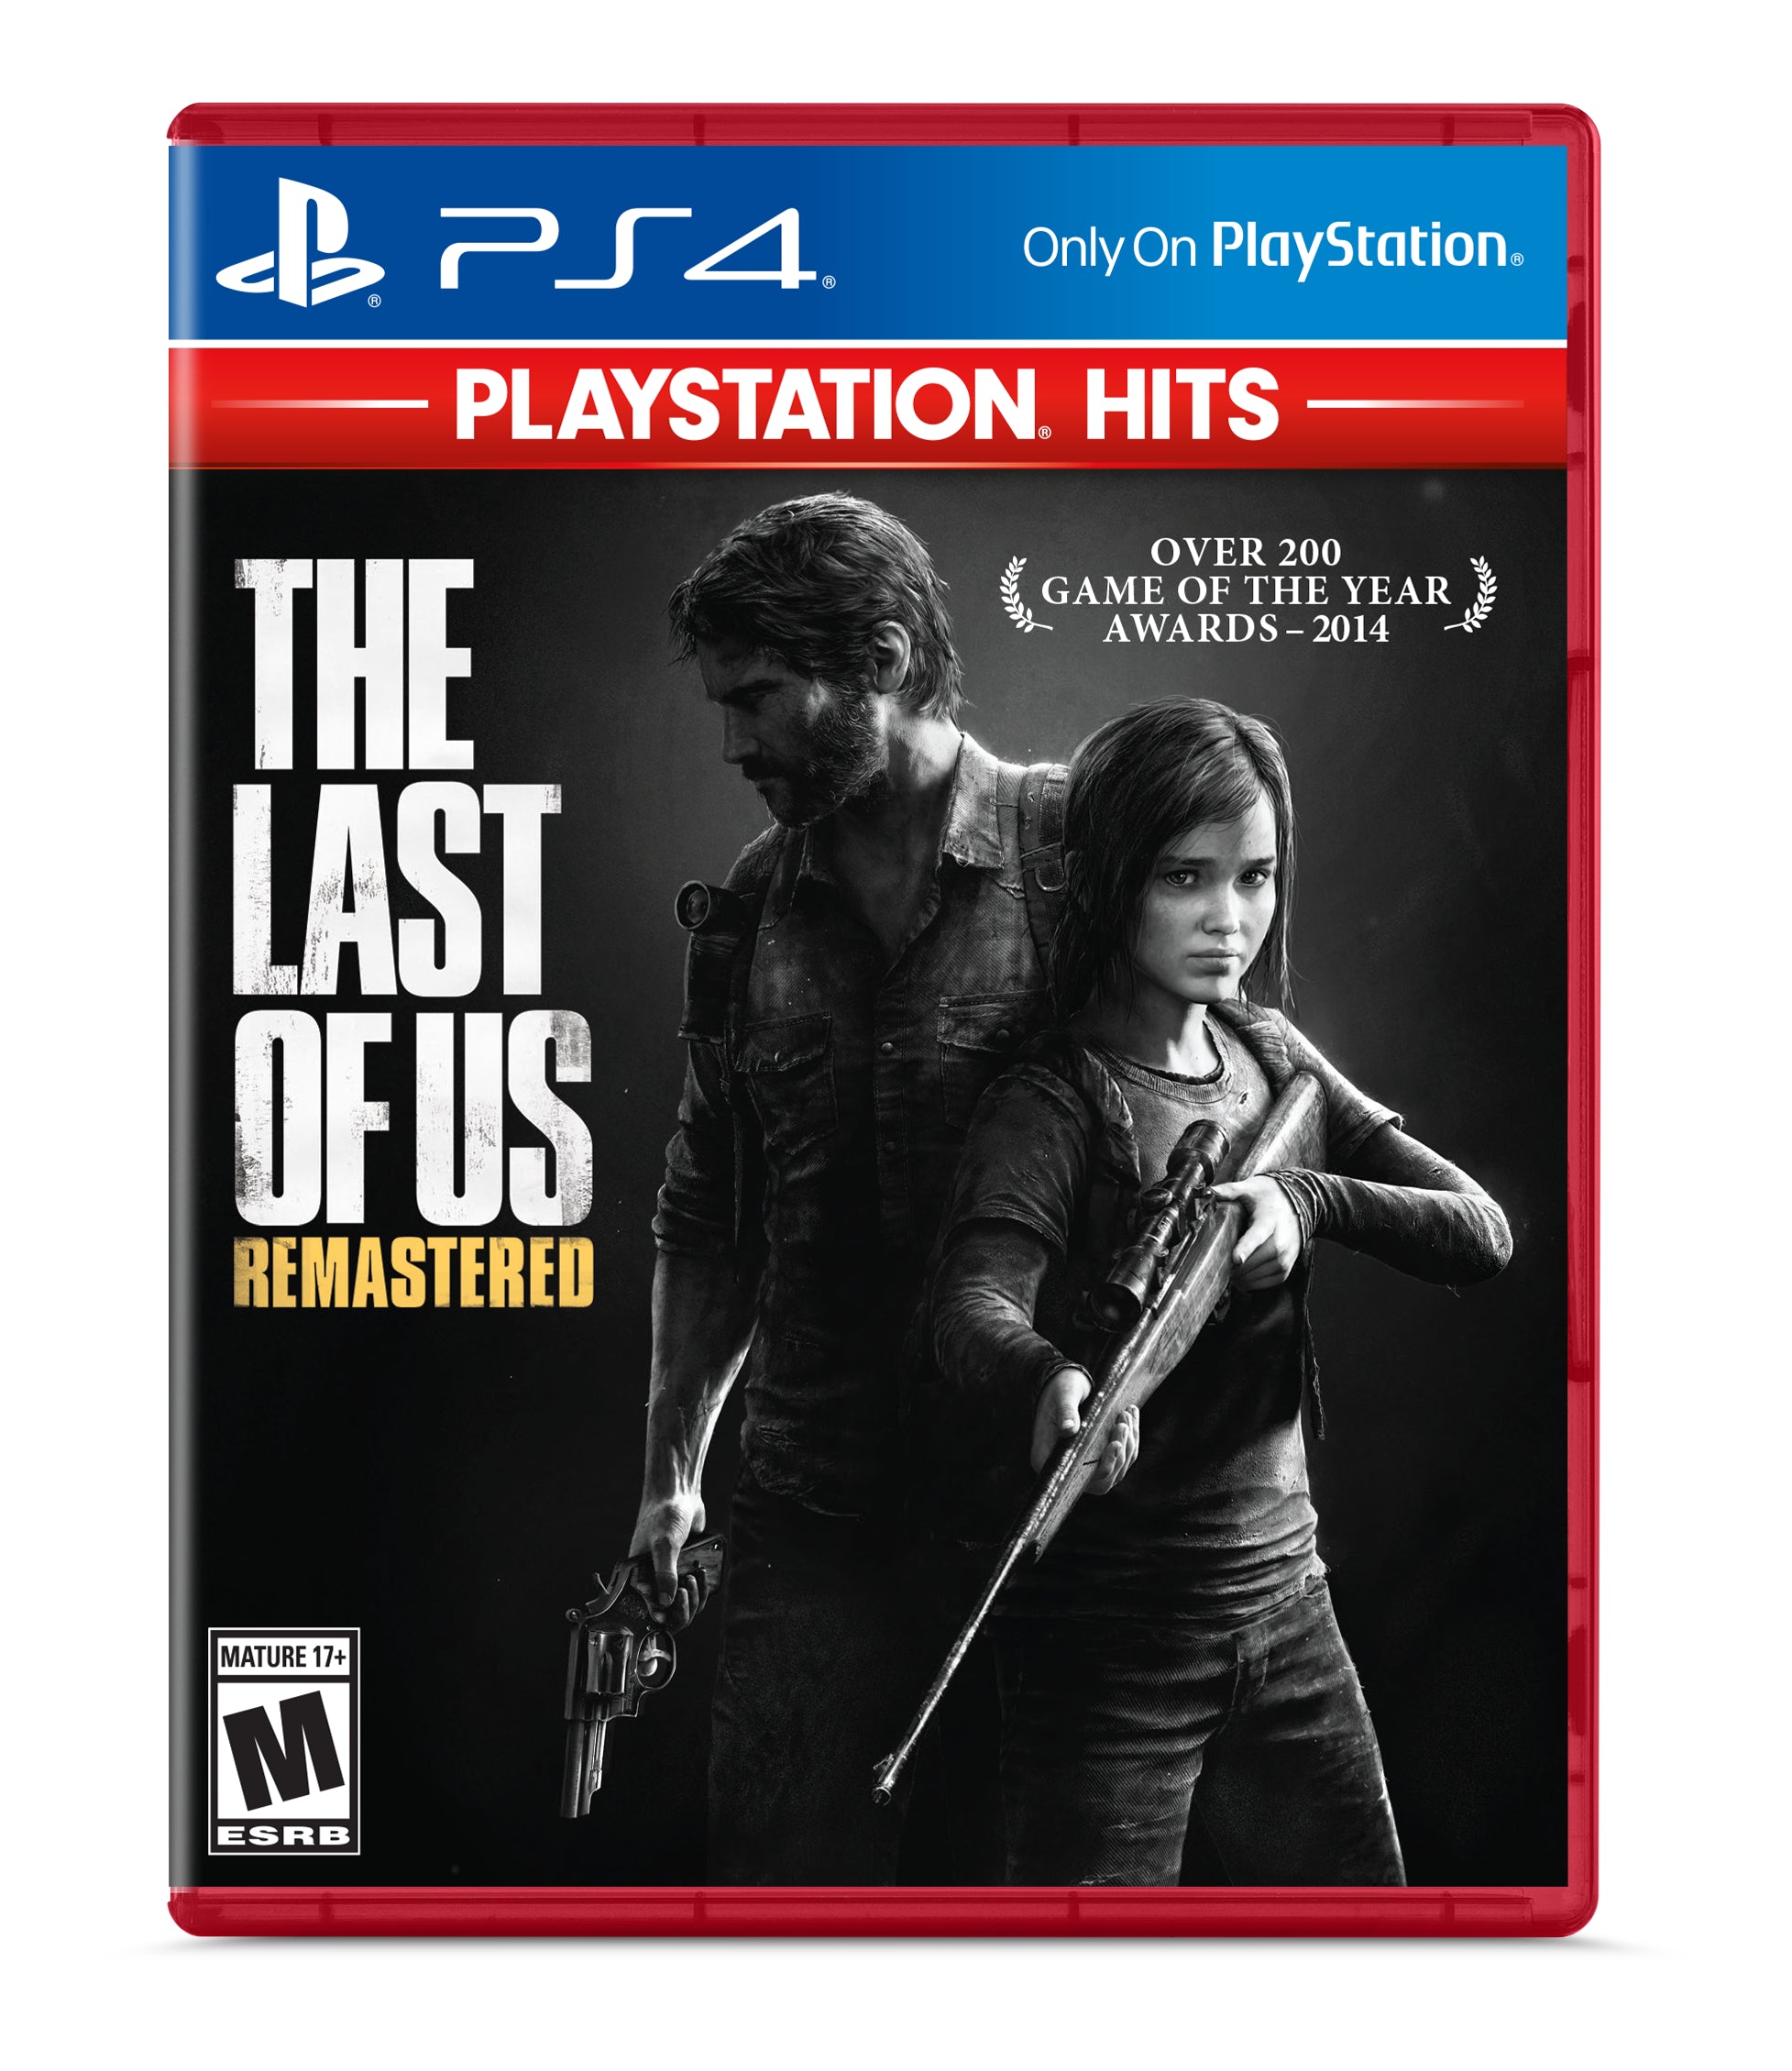 Sony PlayStation 4 Slim The Last of Us: Remastered Bundle 1TB PS4 Gaming Console, Jet Black, with Mytrix Chat Headset